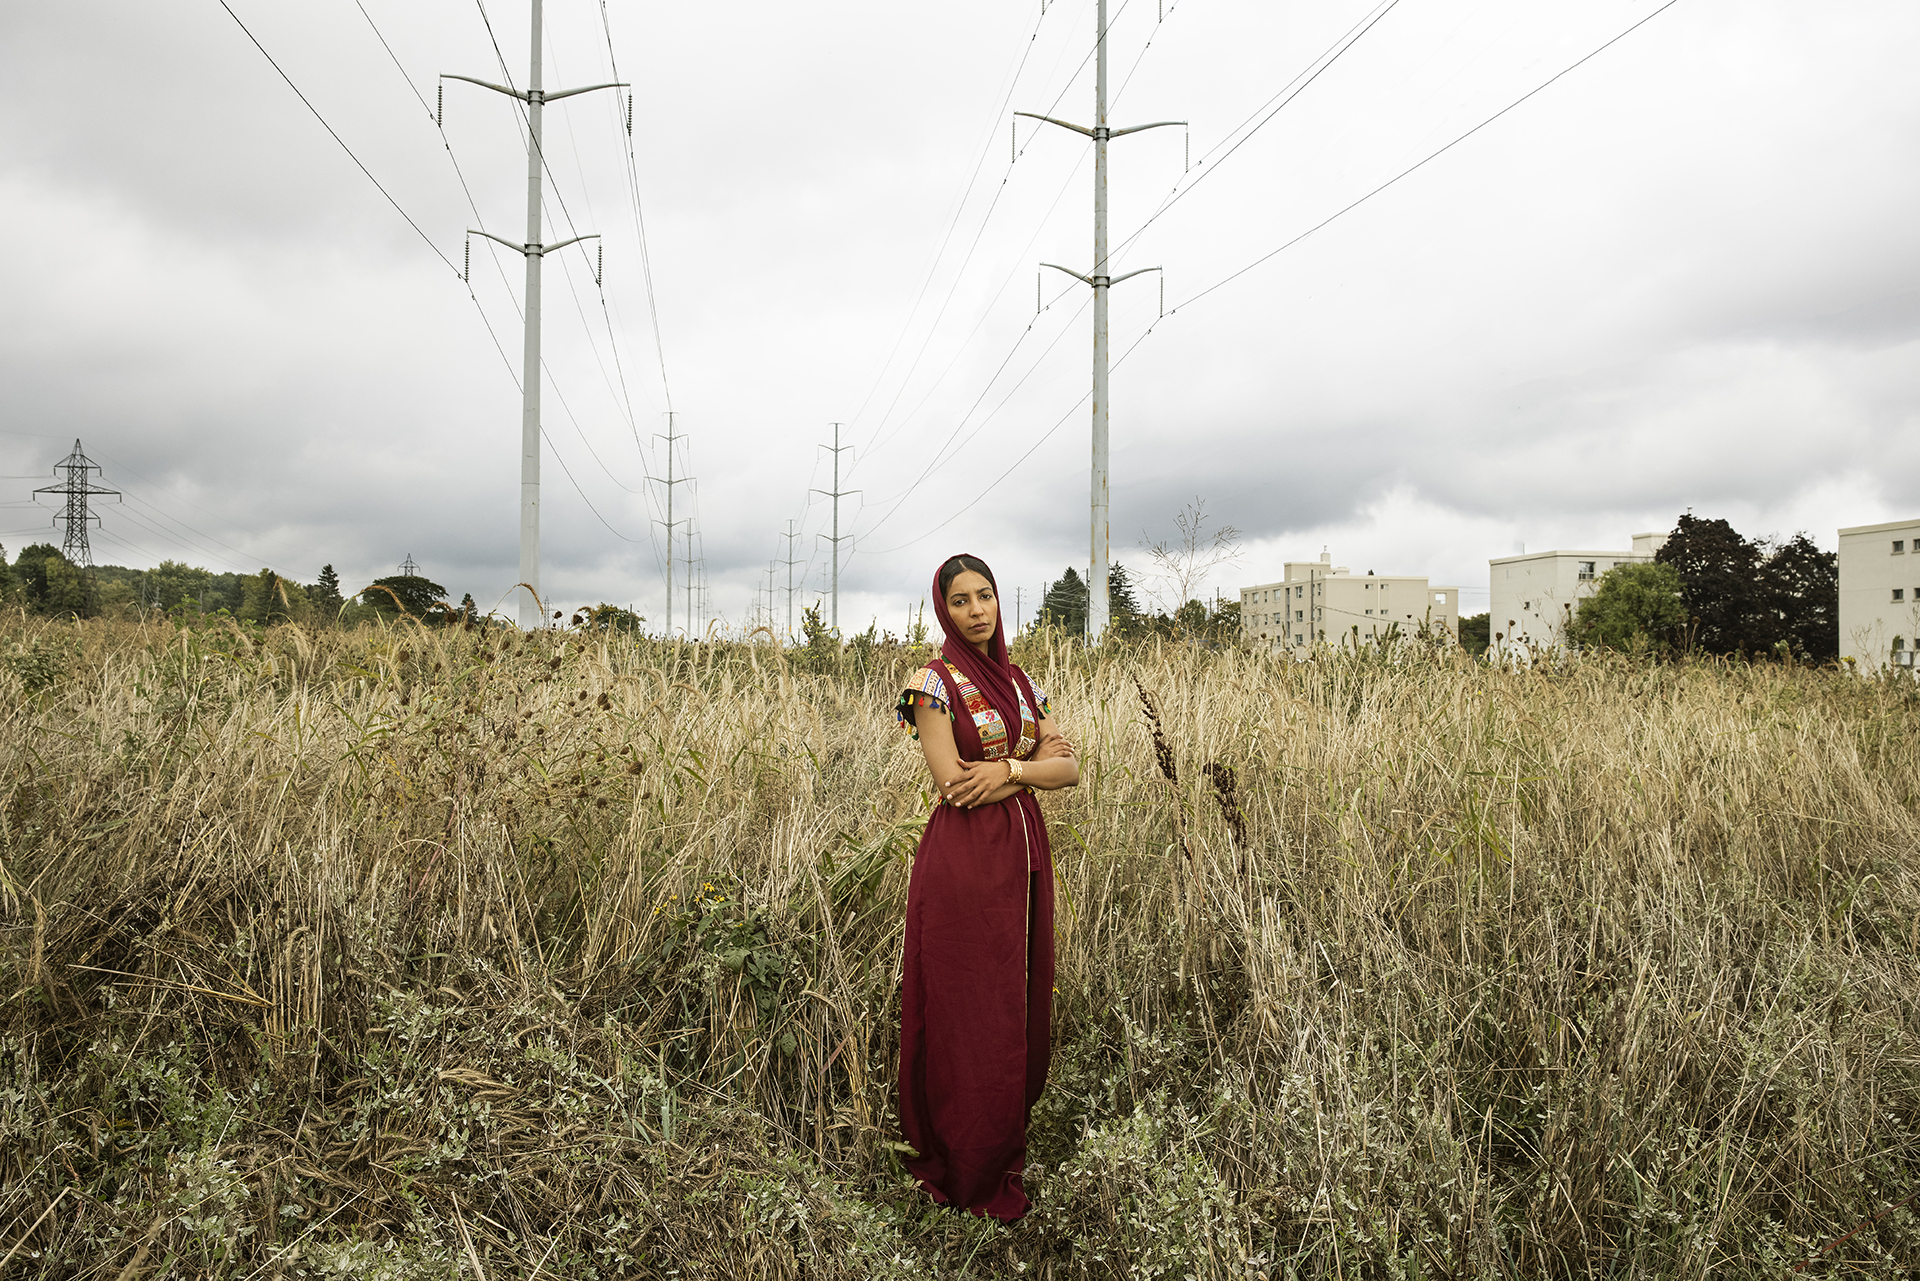 For Huda: a girl standing in the middle of the field wearing a red traditional dress.